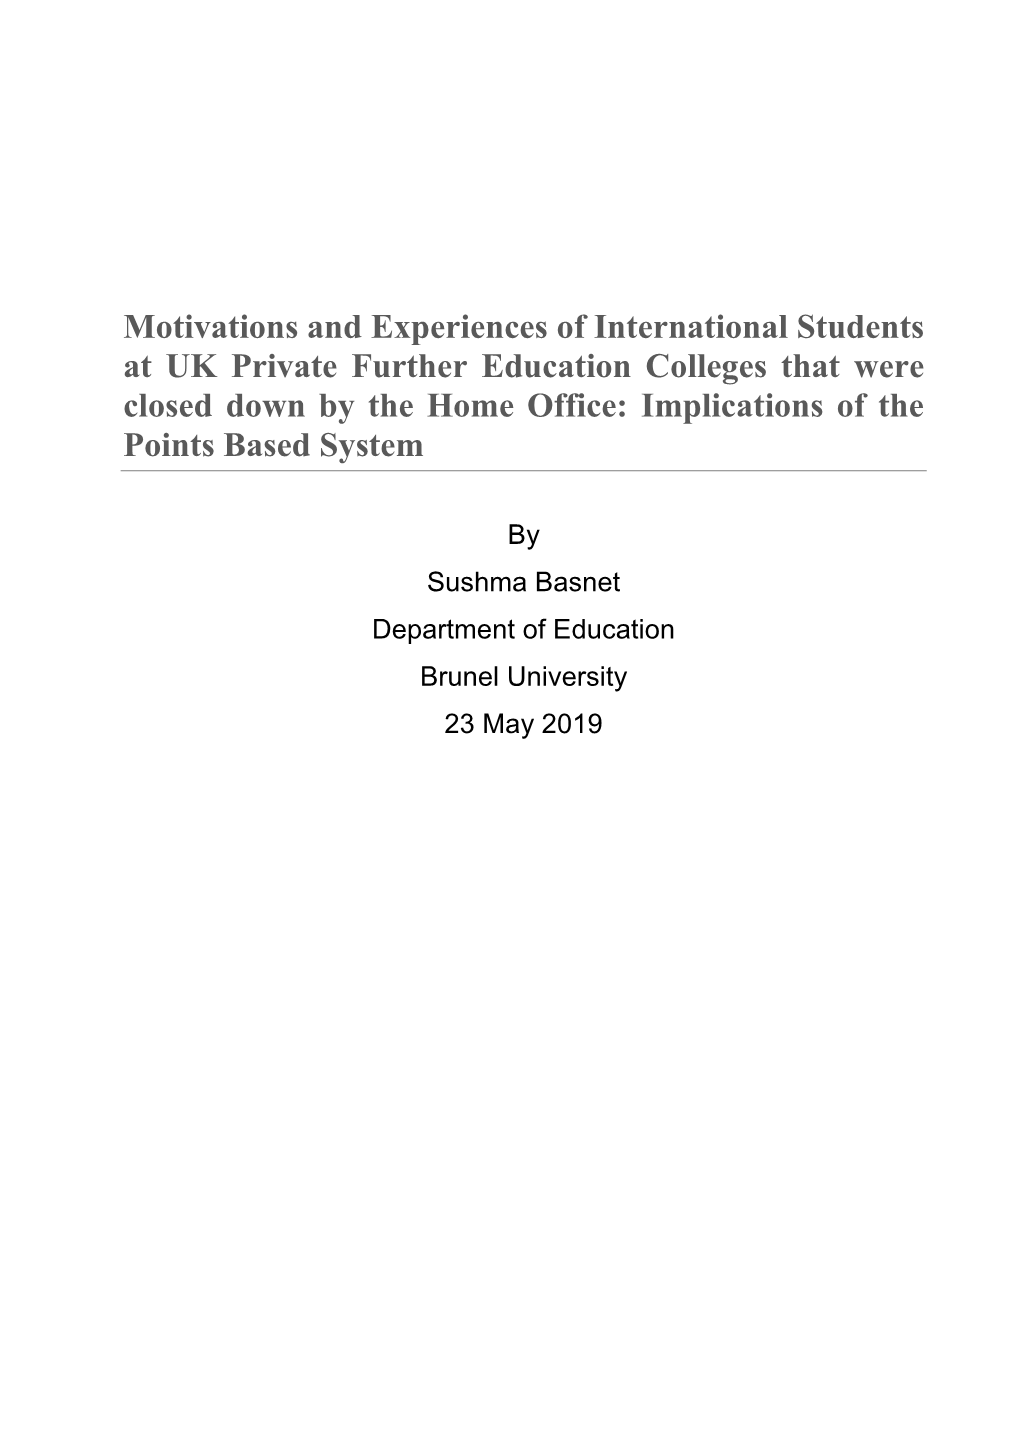 Motivations and Experiences of International Students at UK Private